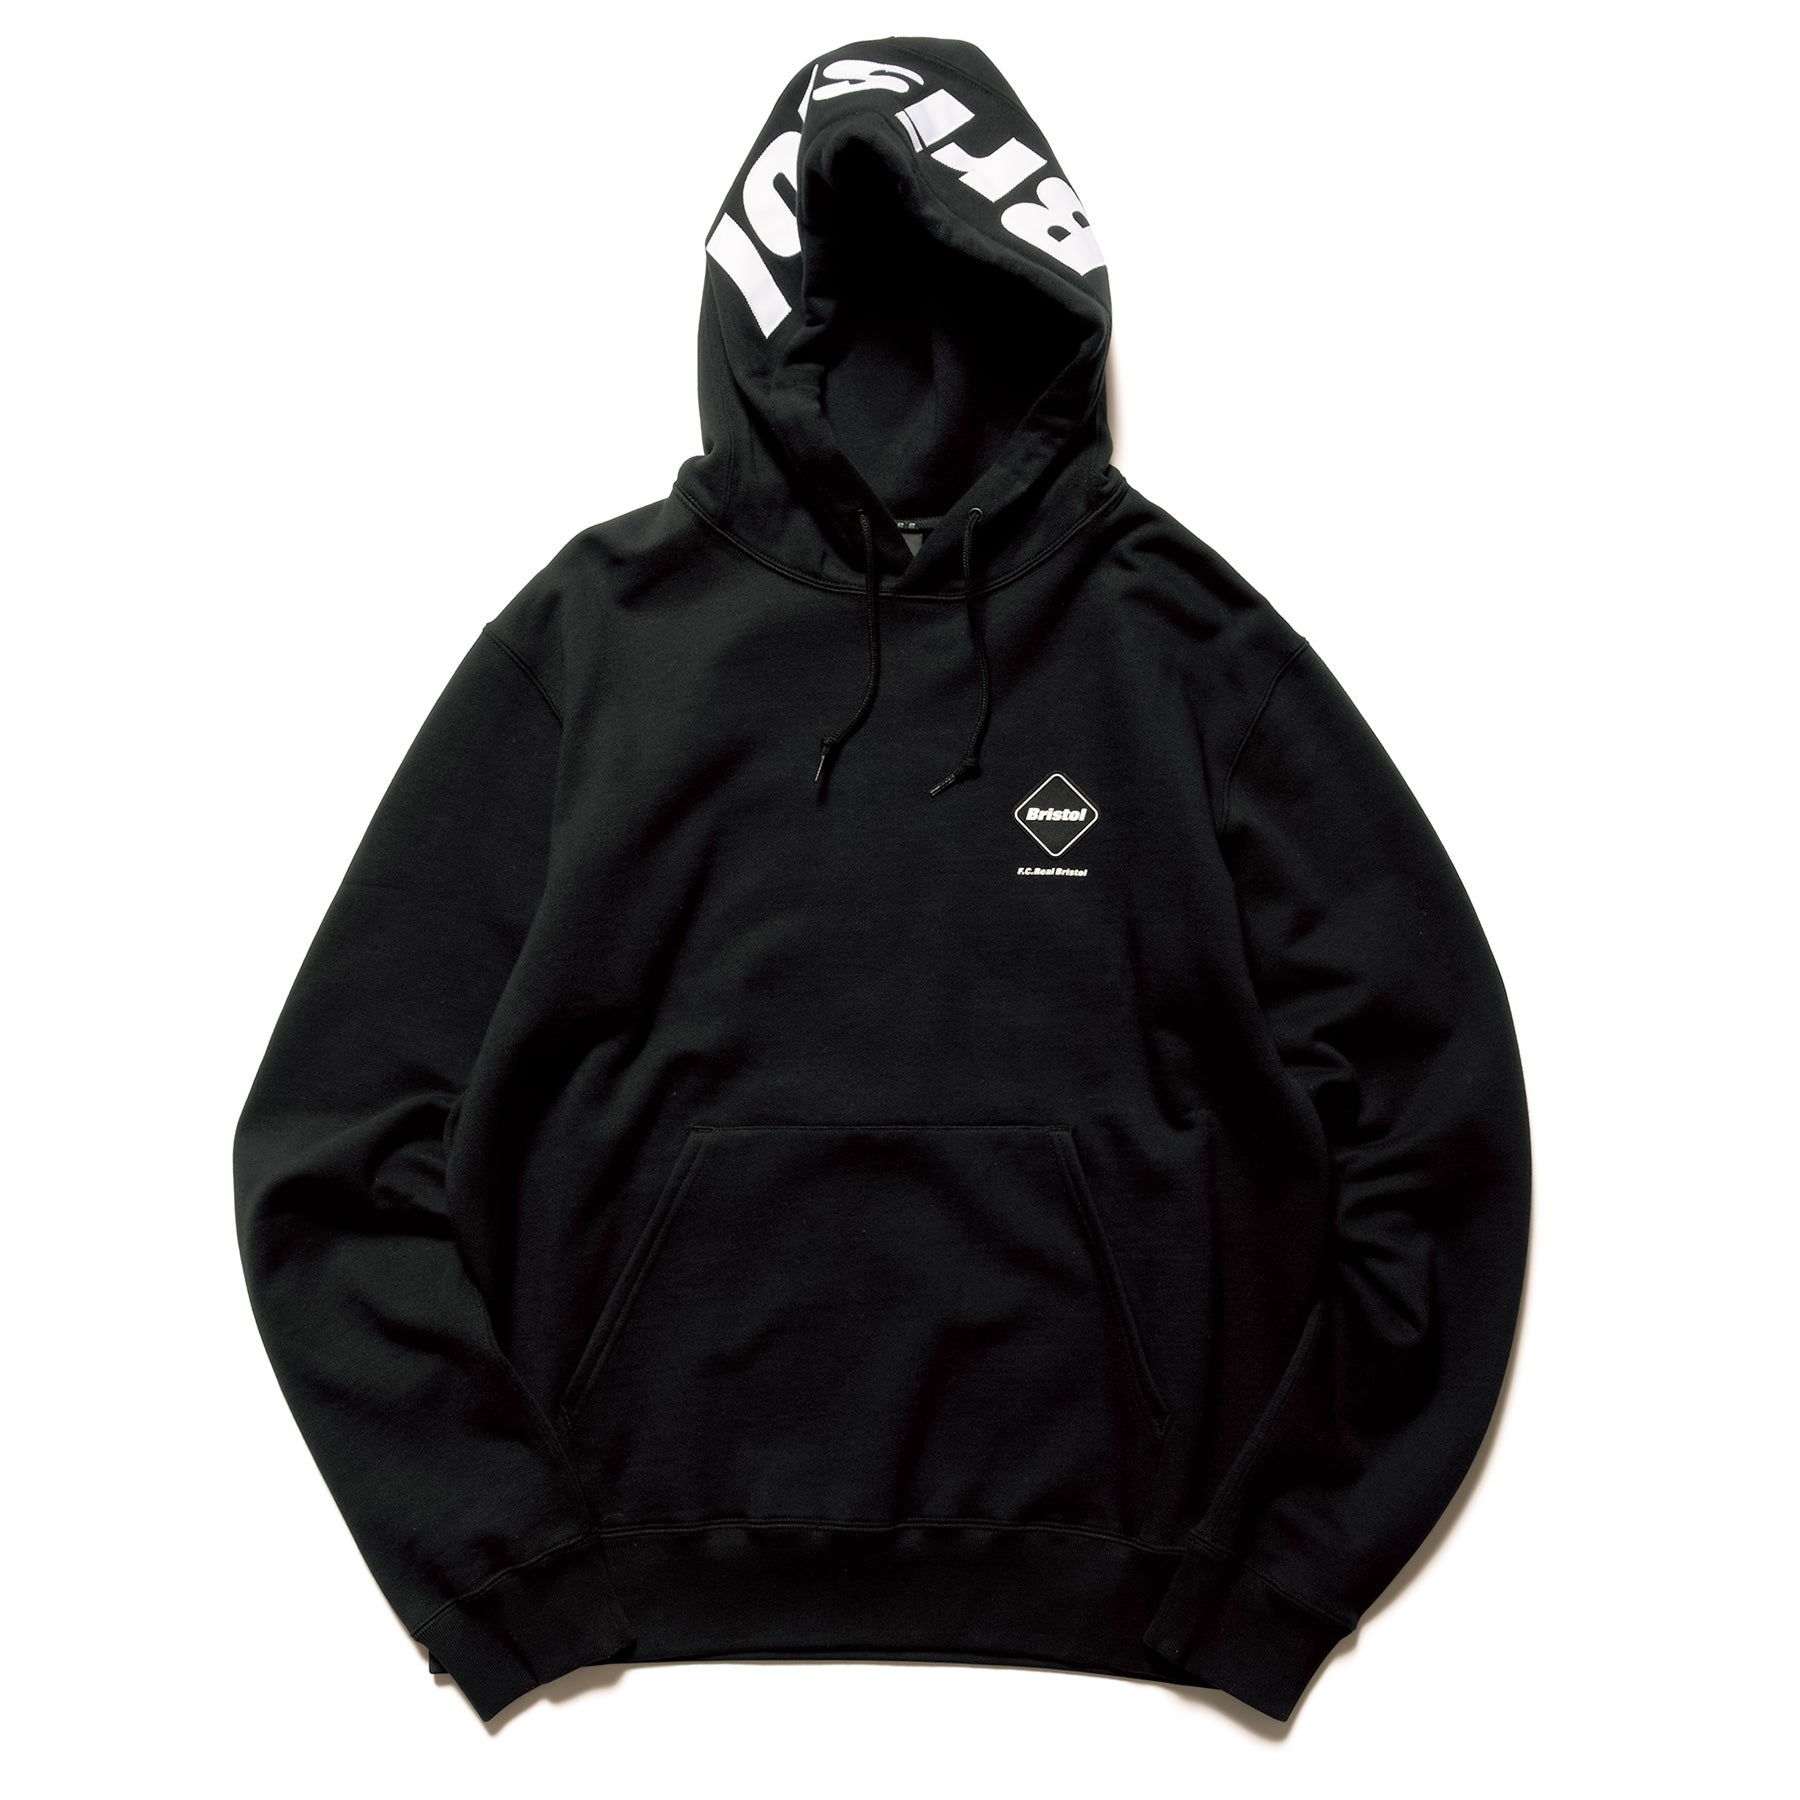 563052● FCRB HOOD LOGO PULL OVER SWEAT